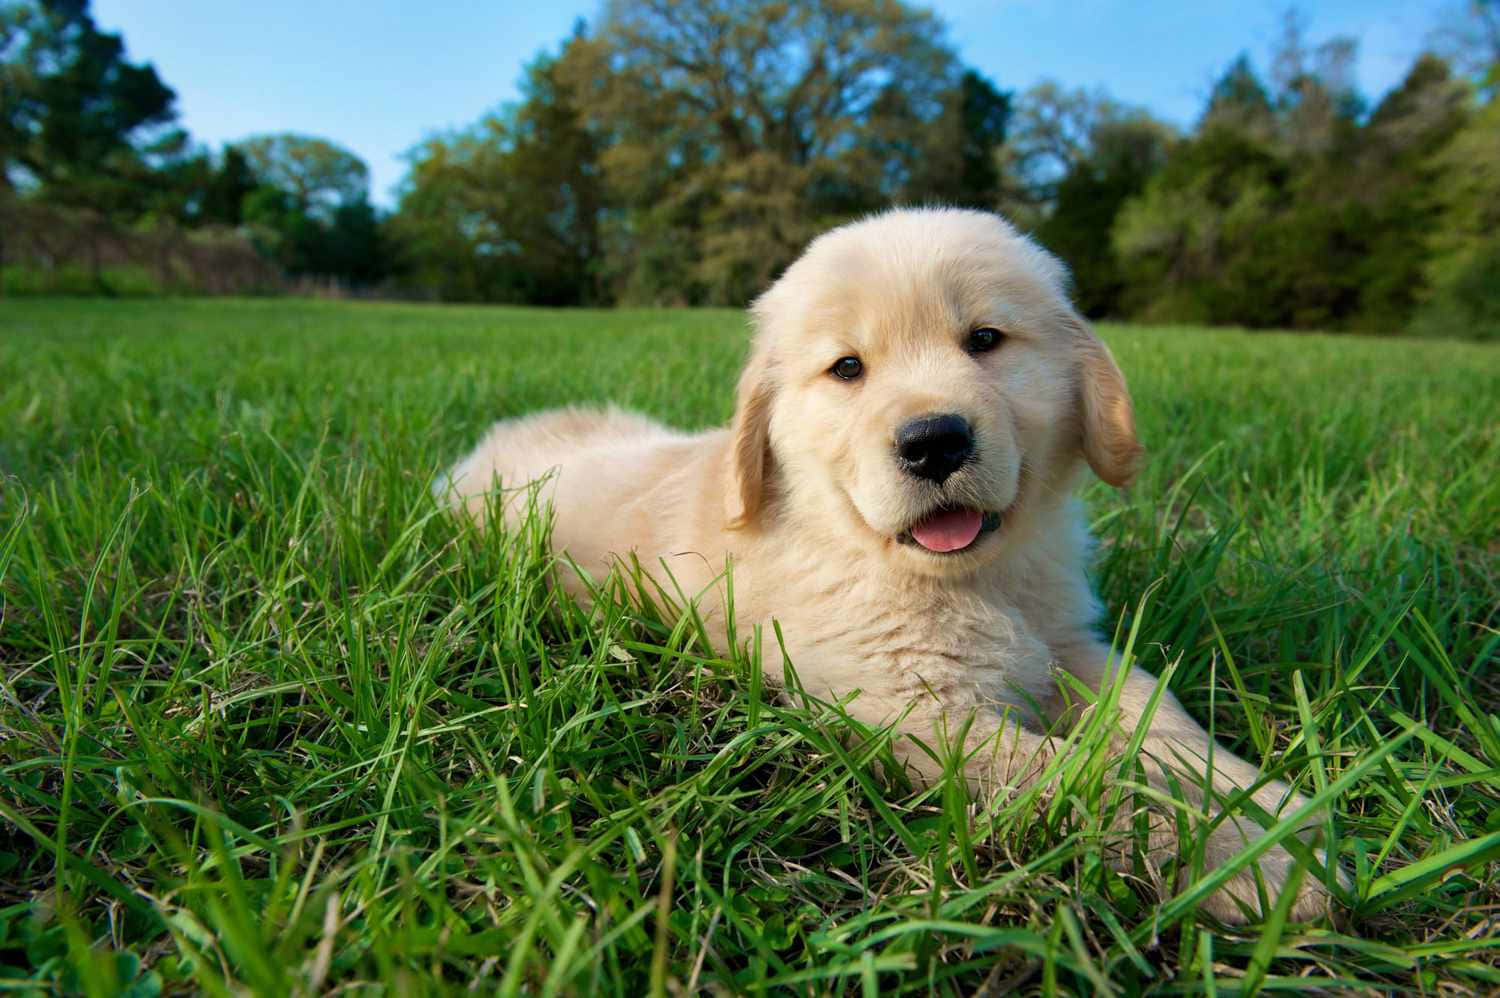 An Adorable Puppy Dog Smiling Up At The Camera